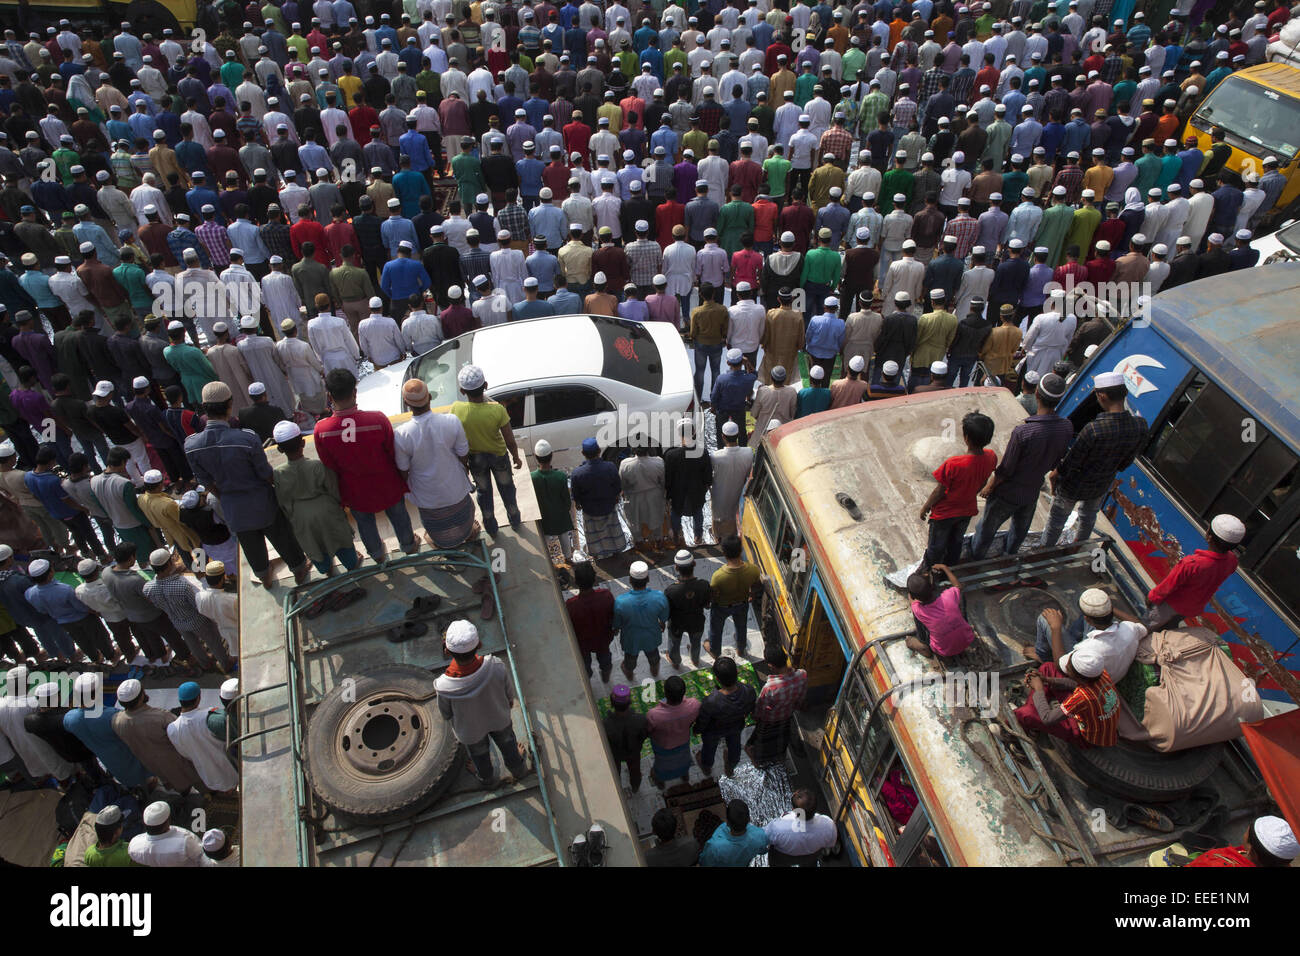 Dhaka, Bangladesh. 16th Jan, 2015. Muslim devotees offer Jumma prayers while attending the World Muslim Congregation, also known as Biswa Ijtema, at Tongi, on the outskirts of the Bangladesh capital Dhaka.Bangladesh's Biswa Ijtema, or World Muslim Congregation, is the world's second largest Islamic gathering after the Hajj with devotees coming from all over the globe to pray and hear imams preach for three days. Credit:  Zakir Hossain Chowdhury/ZUMA Wire/Alamy Live News Stock Photo